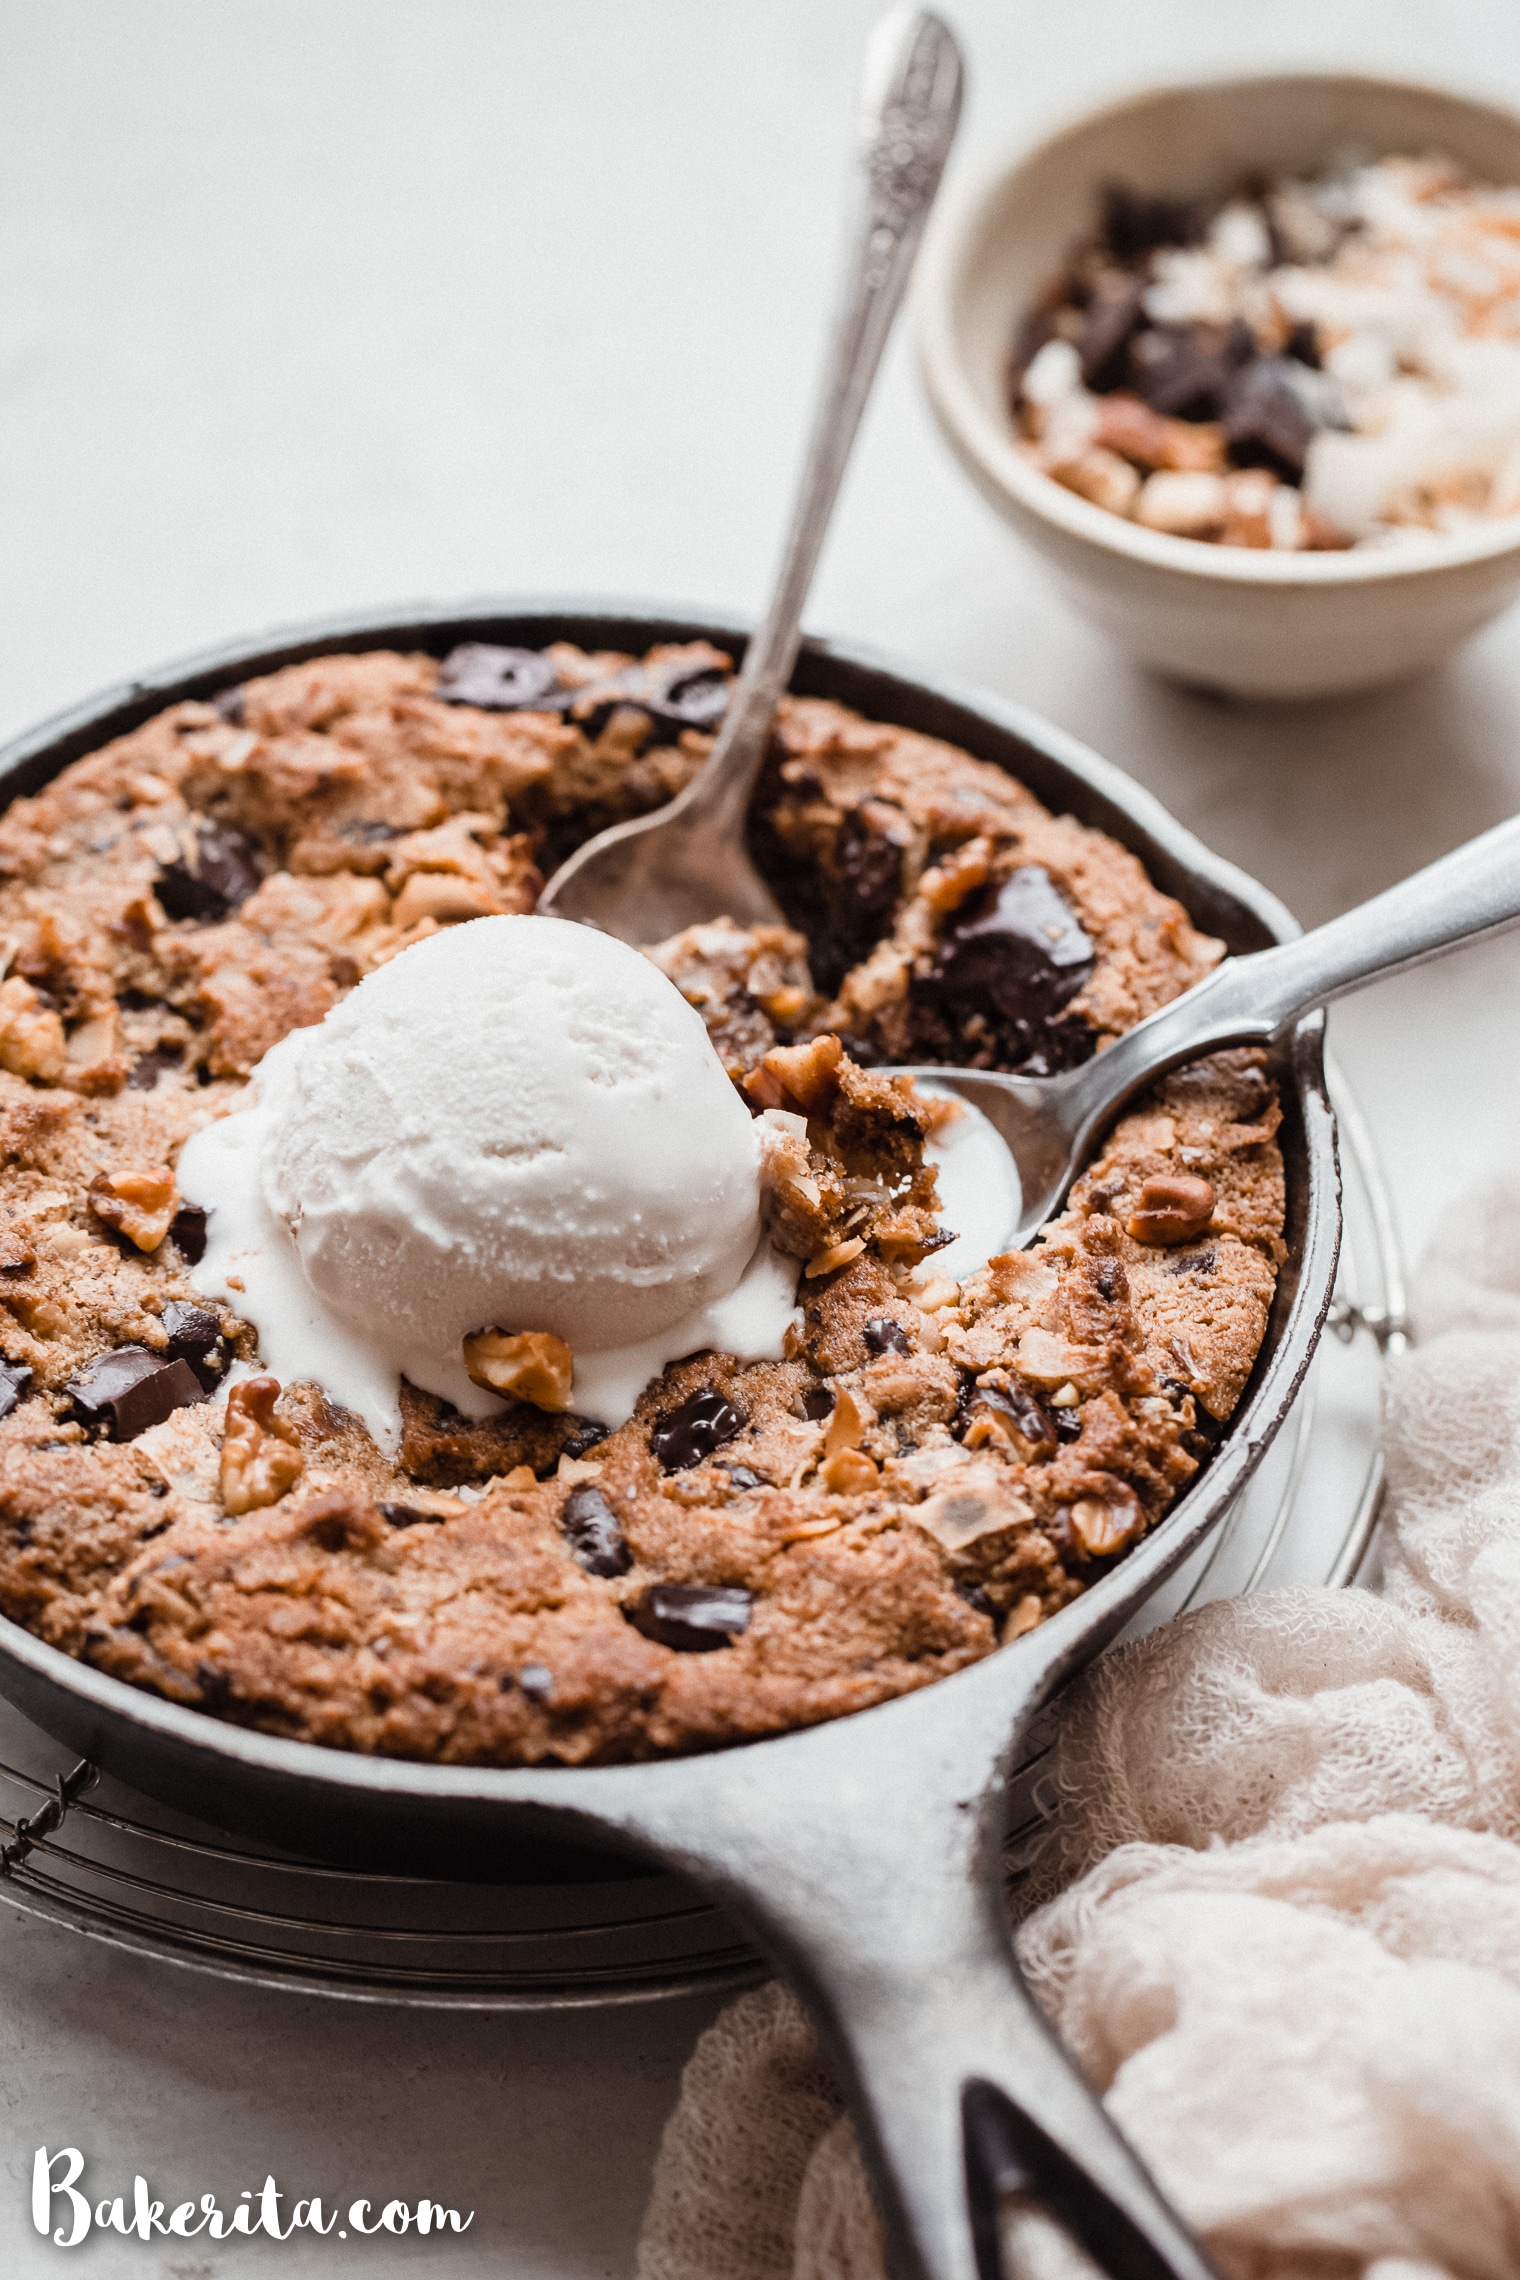 This Magic Chocolate Chip Skillet Cookie is a big, gooey and decadent gluten-free and vegan dessert. With chocolate, walnuts, and coconut, it's reminiscent of my longtime favorite, magic cookie bars. It's best topped with ice cream and so easy to make.